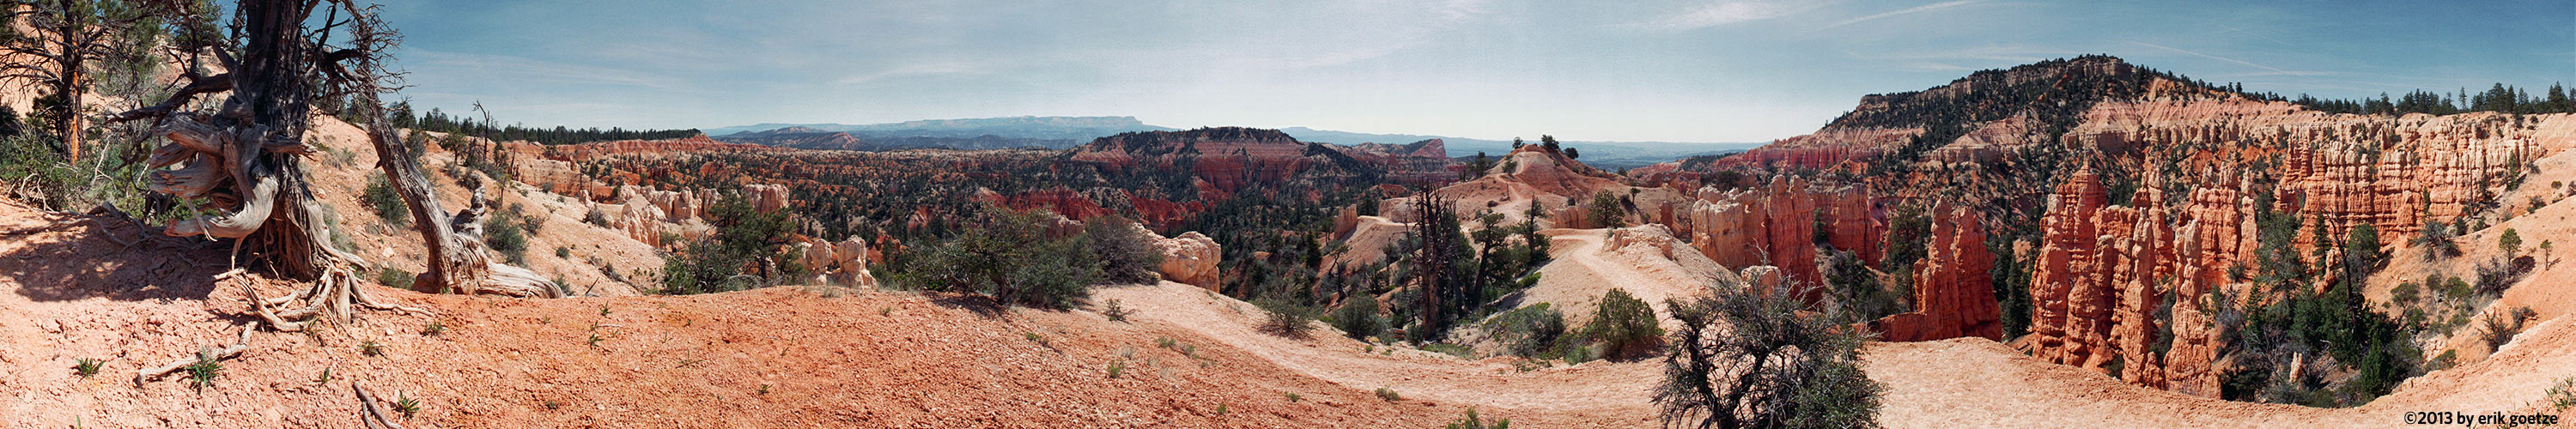 This 360 panorama is from Bryce Canyon, Utah